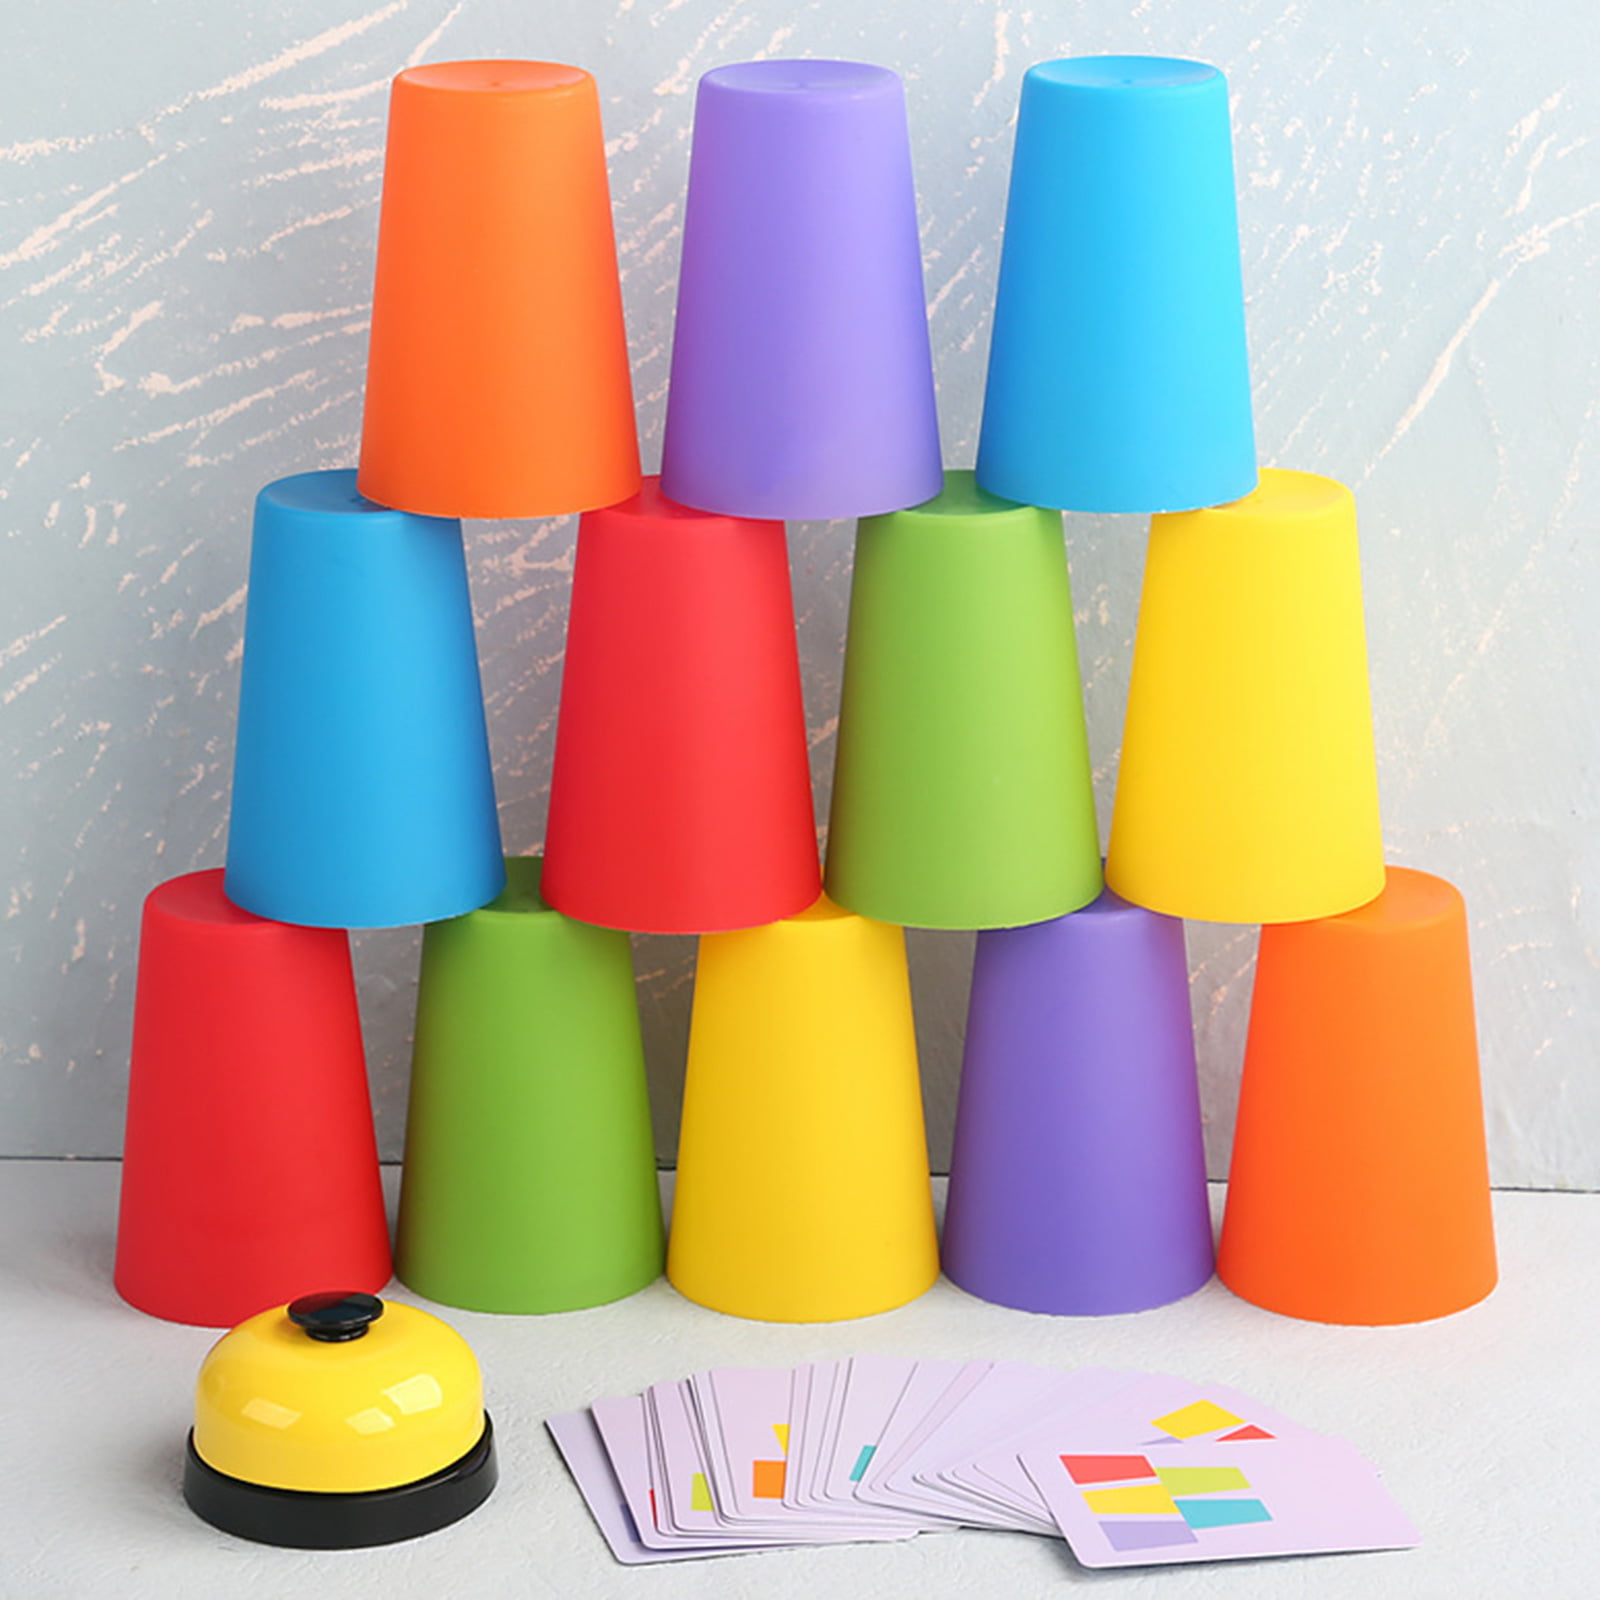 Ten Fun Games with Paper Cups - One Perfect Day